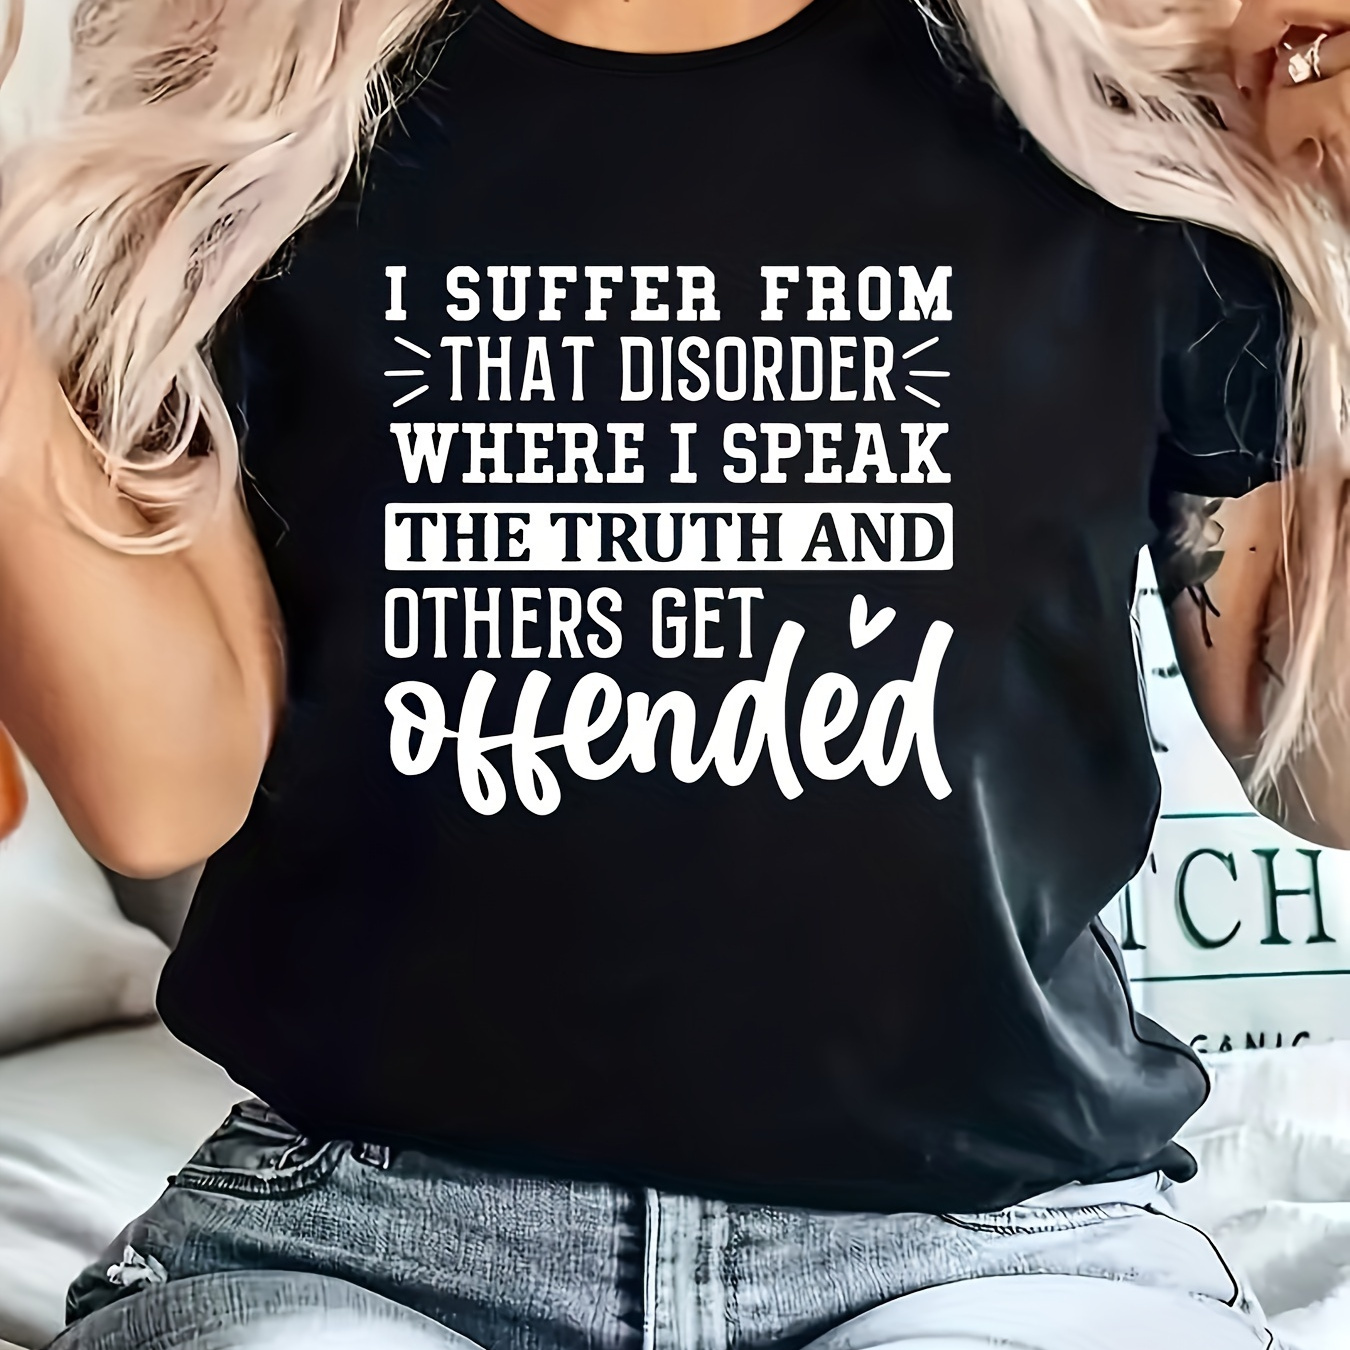 

Women's Plus Size Casual Sporty T-shirt, "i Suffer From That Disorder Where I Speak The Truth And Others Get Offended" Print, Comfort Fit Short Sleeve Tee, Fashion Breathable Casual Top